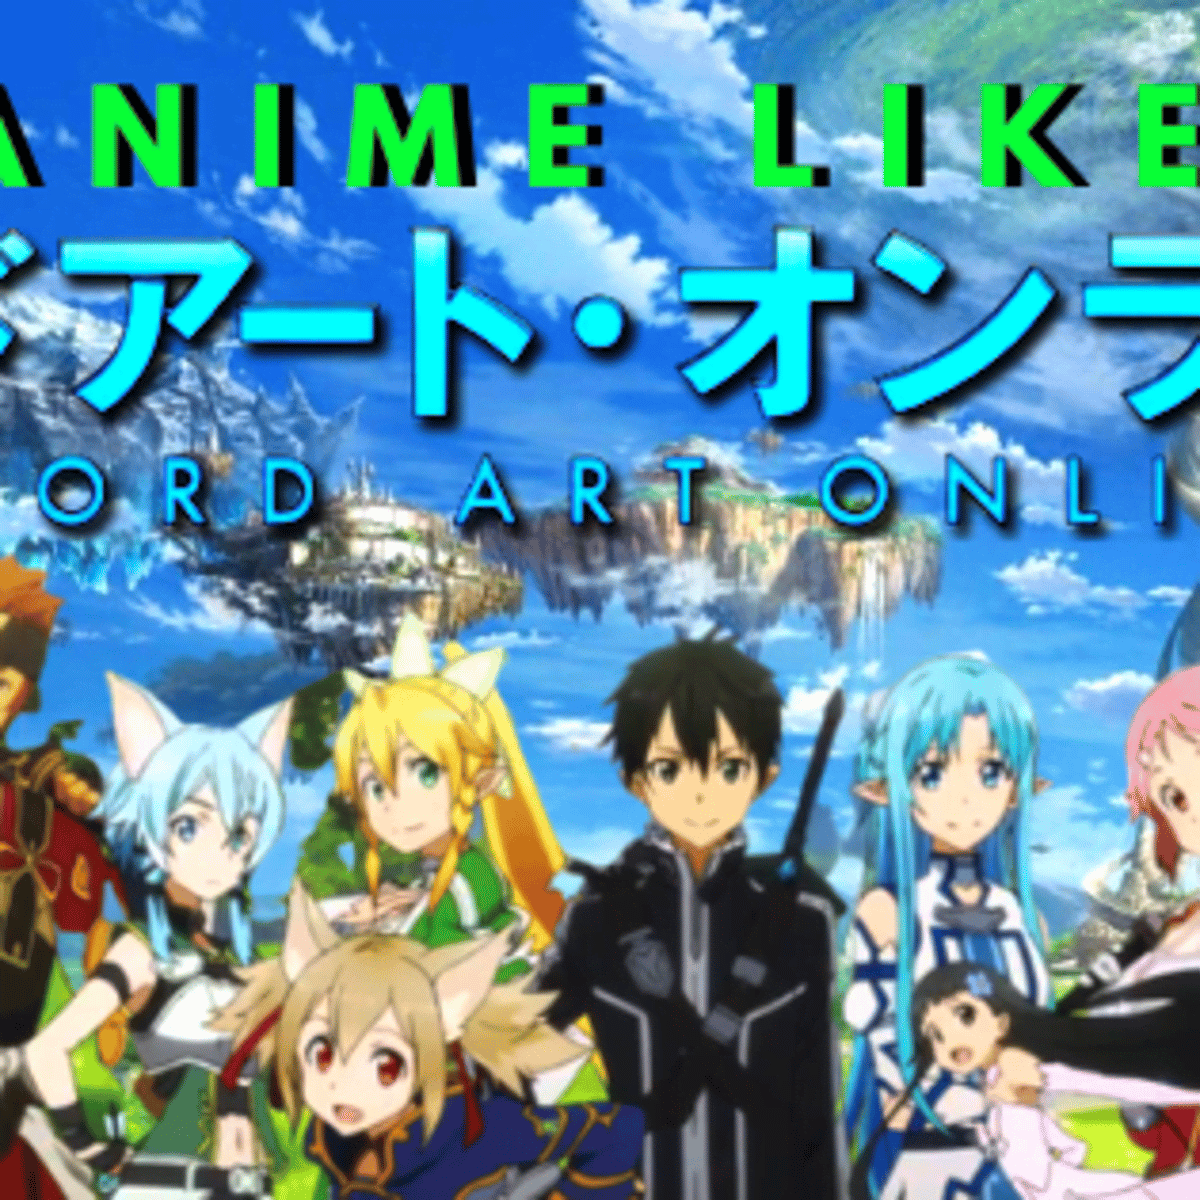 Watch Anime With Friends Online 2020